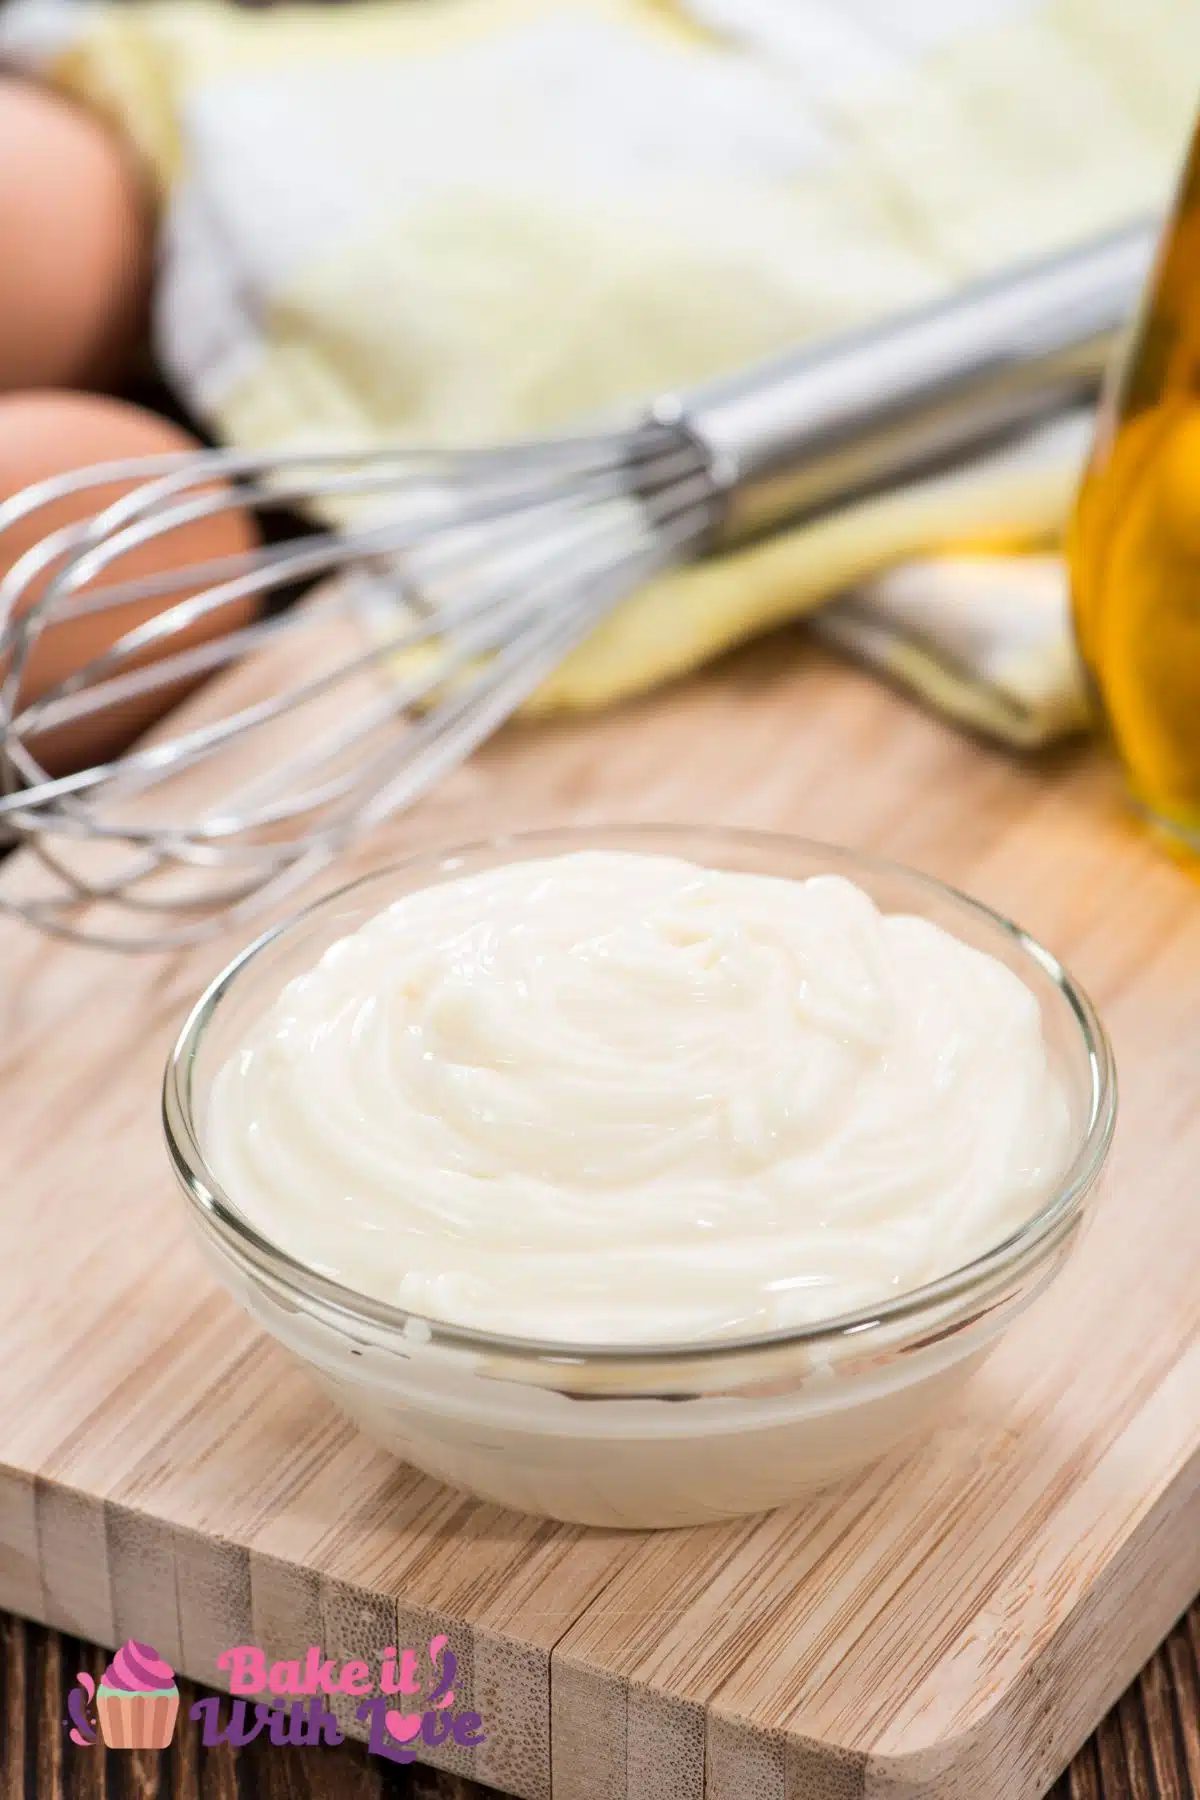 Tasty homemade mayonnaise in a clear glass bowl with a wire whisk and ingredients in the background.